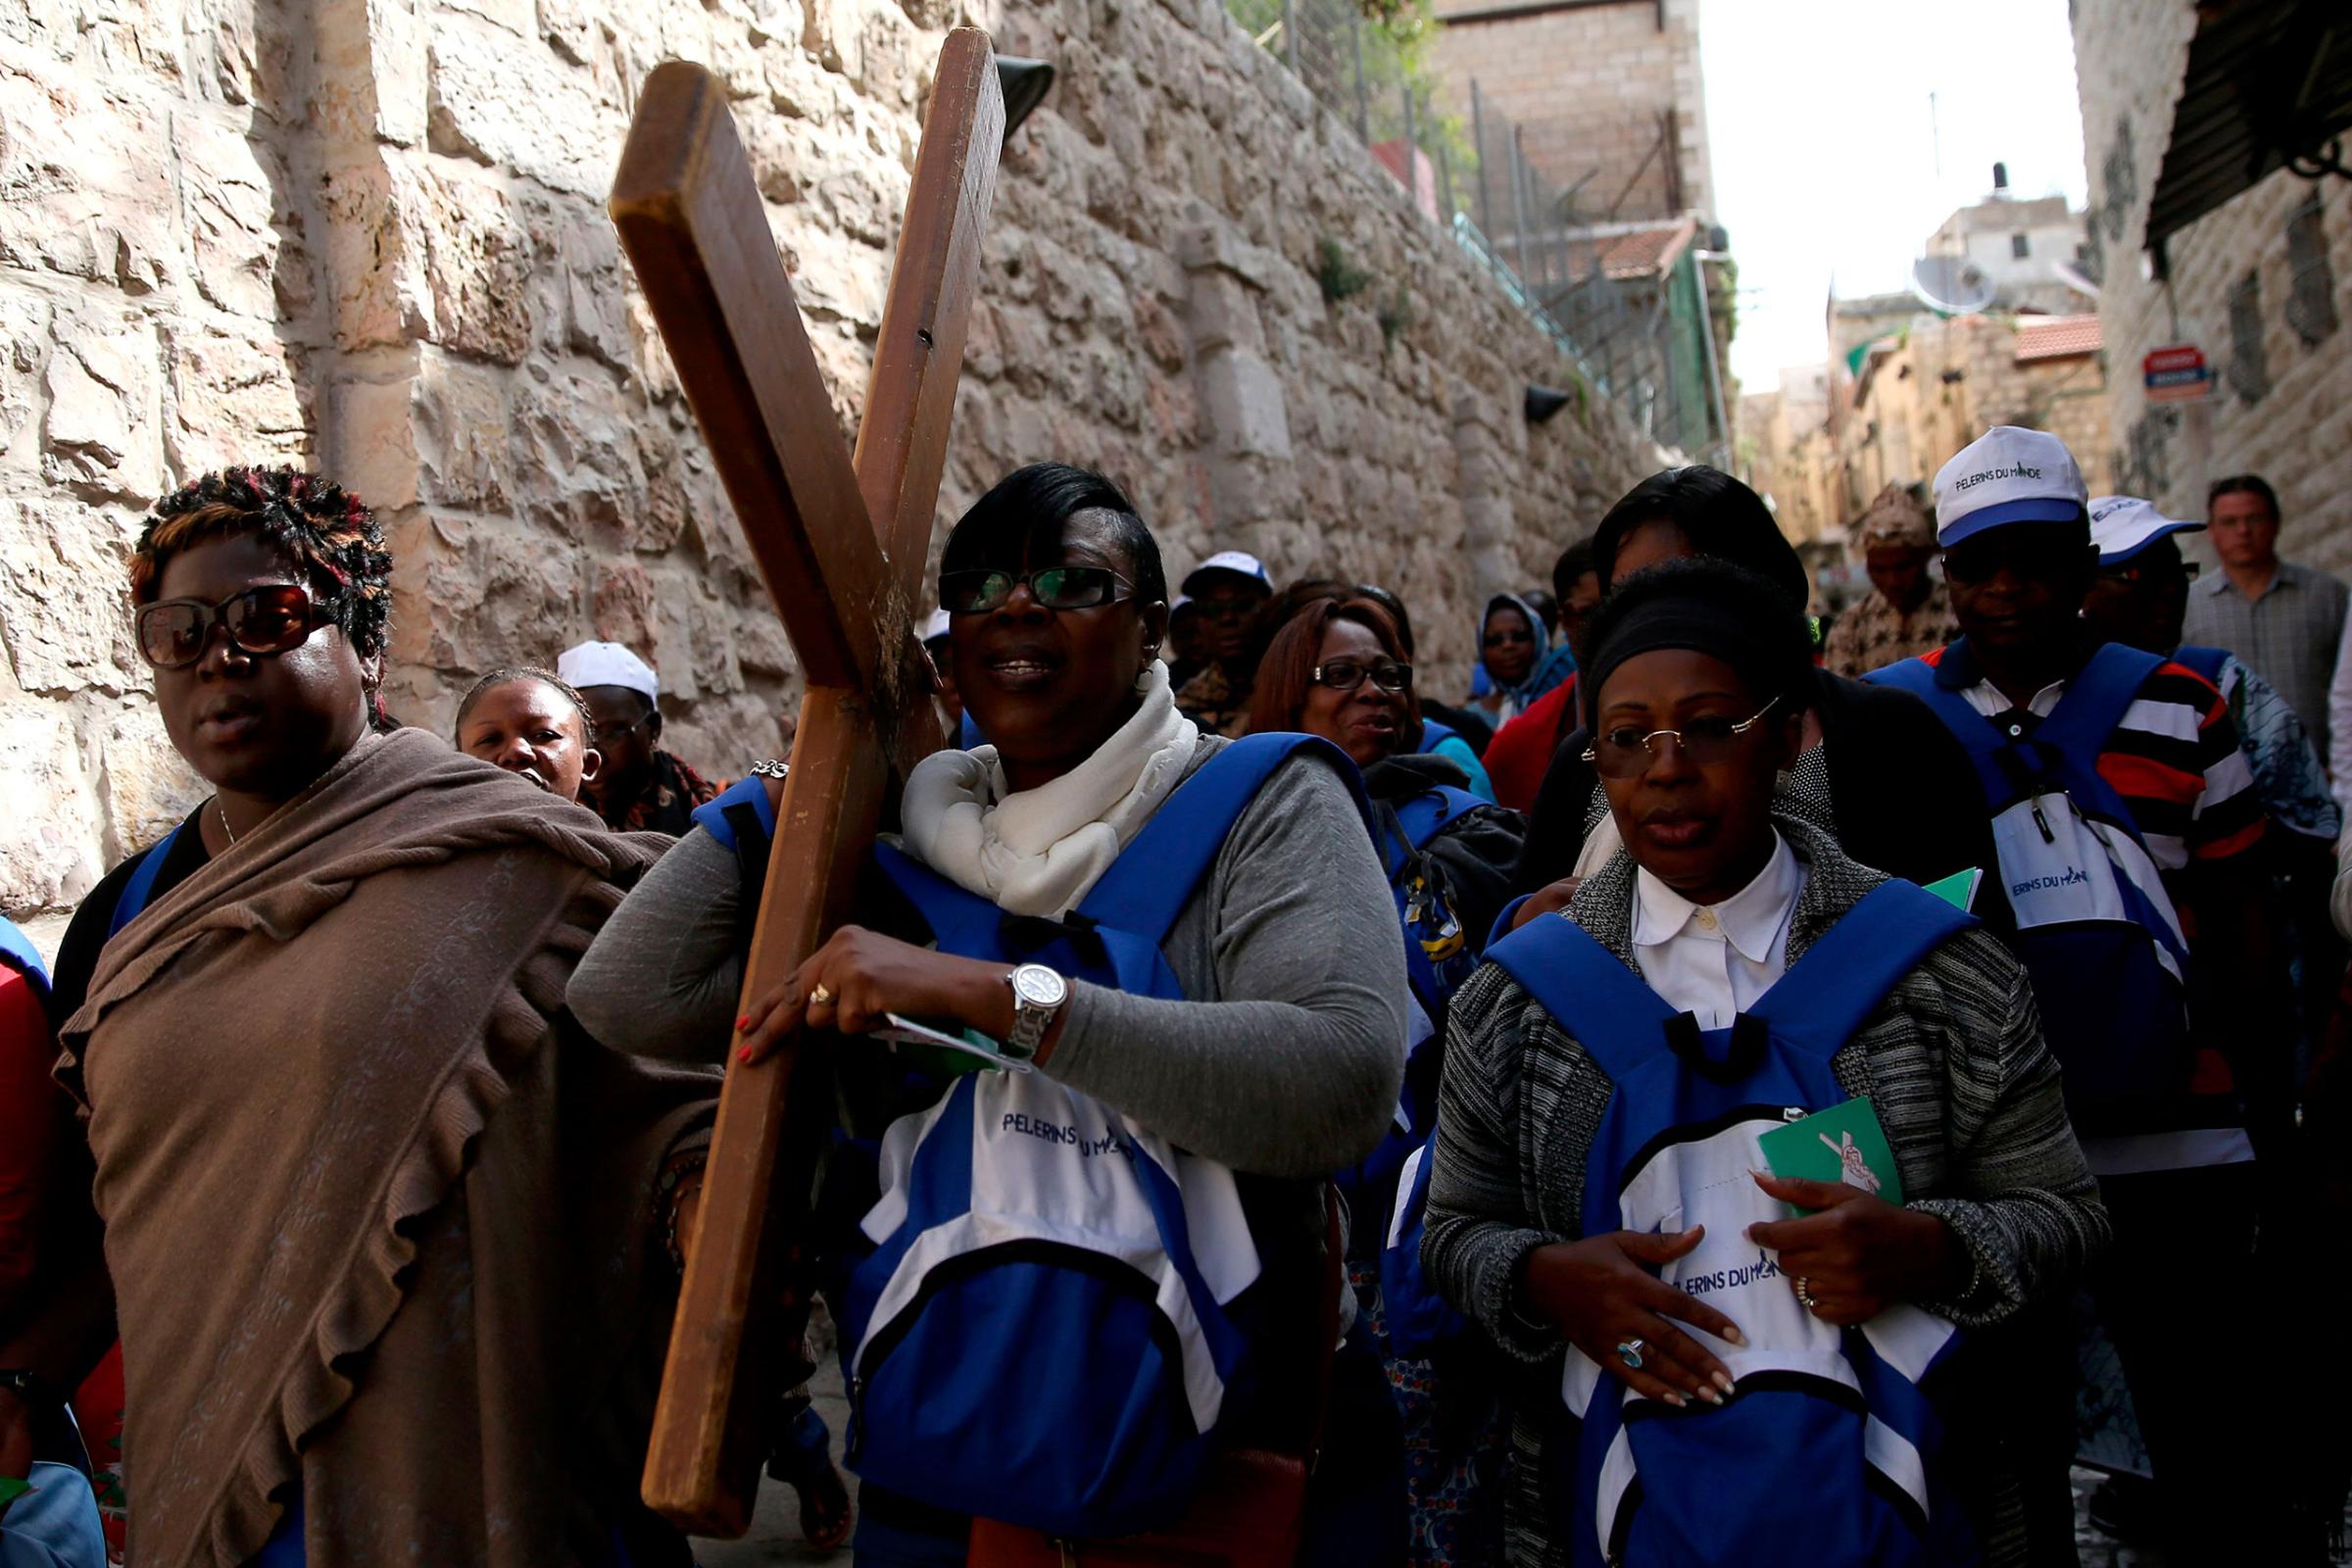 Catholic pilgrims from the Ivory Cost carry a wooden cross along the Via Dolorosa (Way of Suffering) during the Good Friday procession in the Jerusalem's Old City of Jerusalem, March 25, 2016.